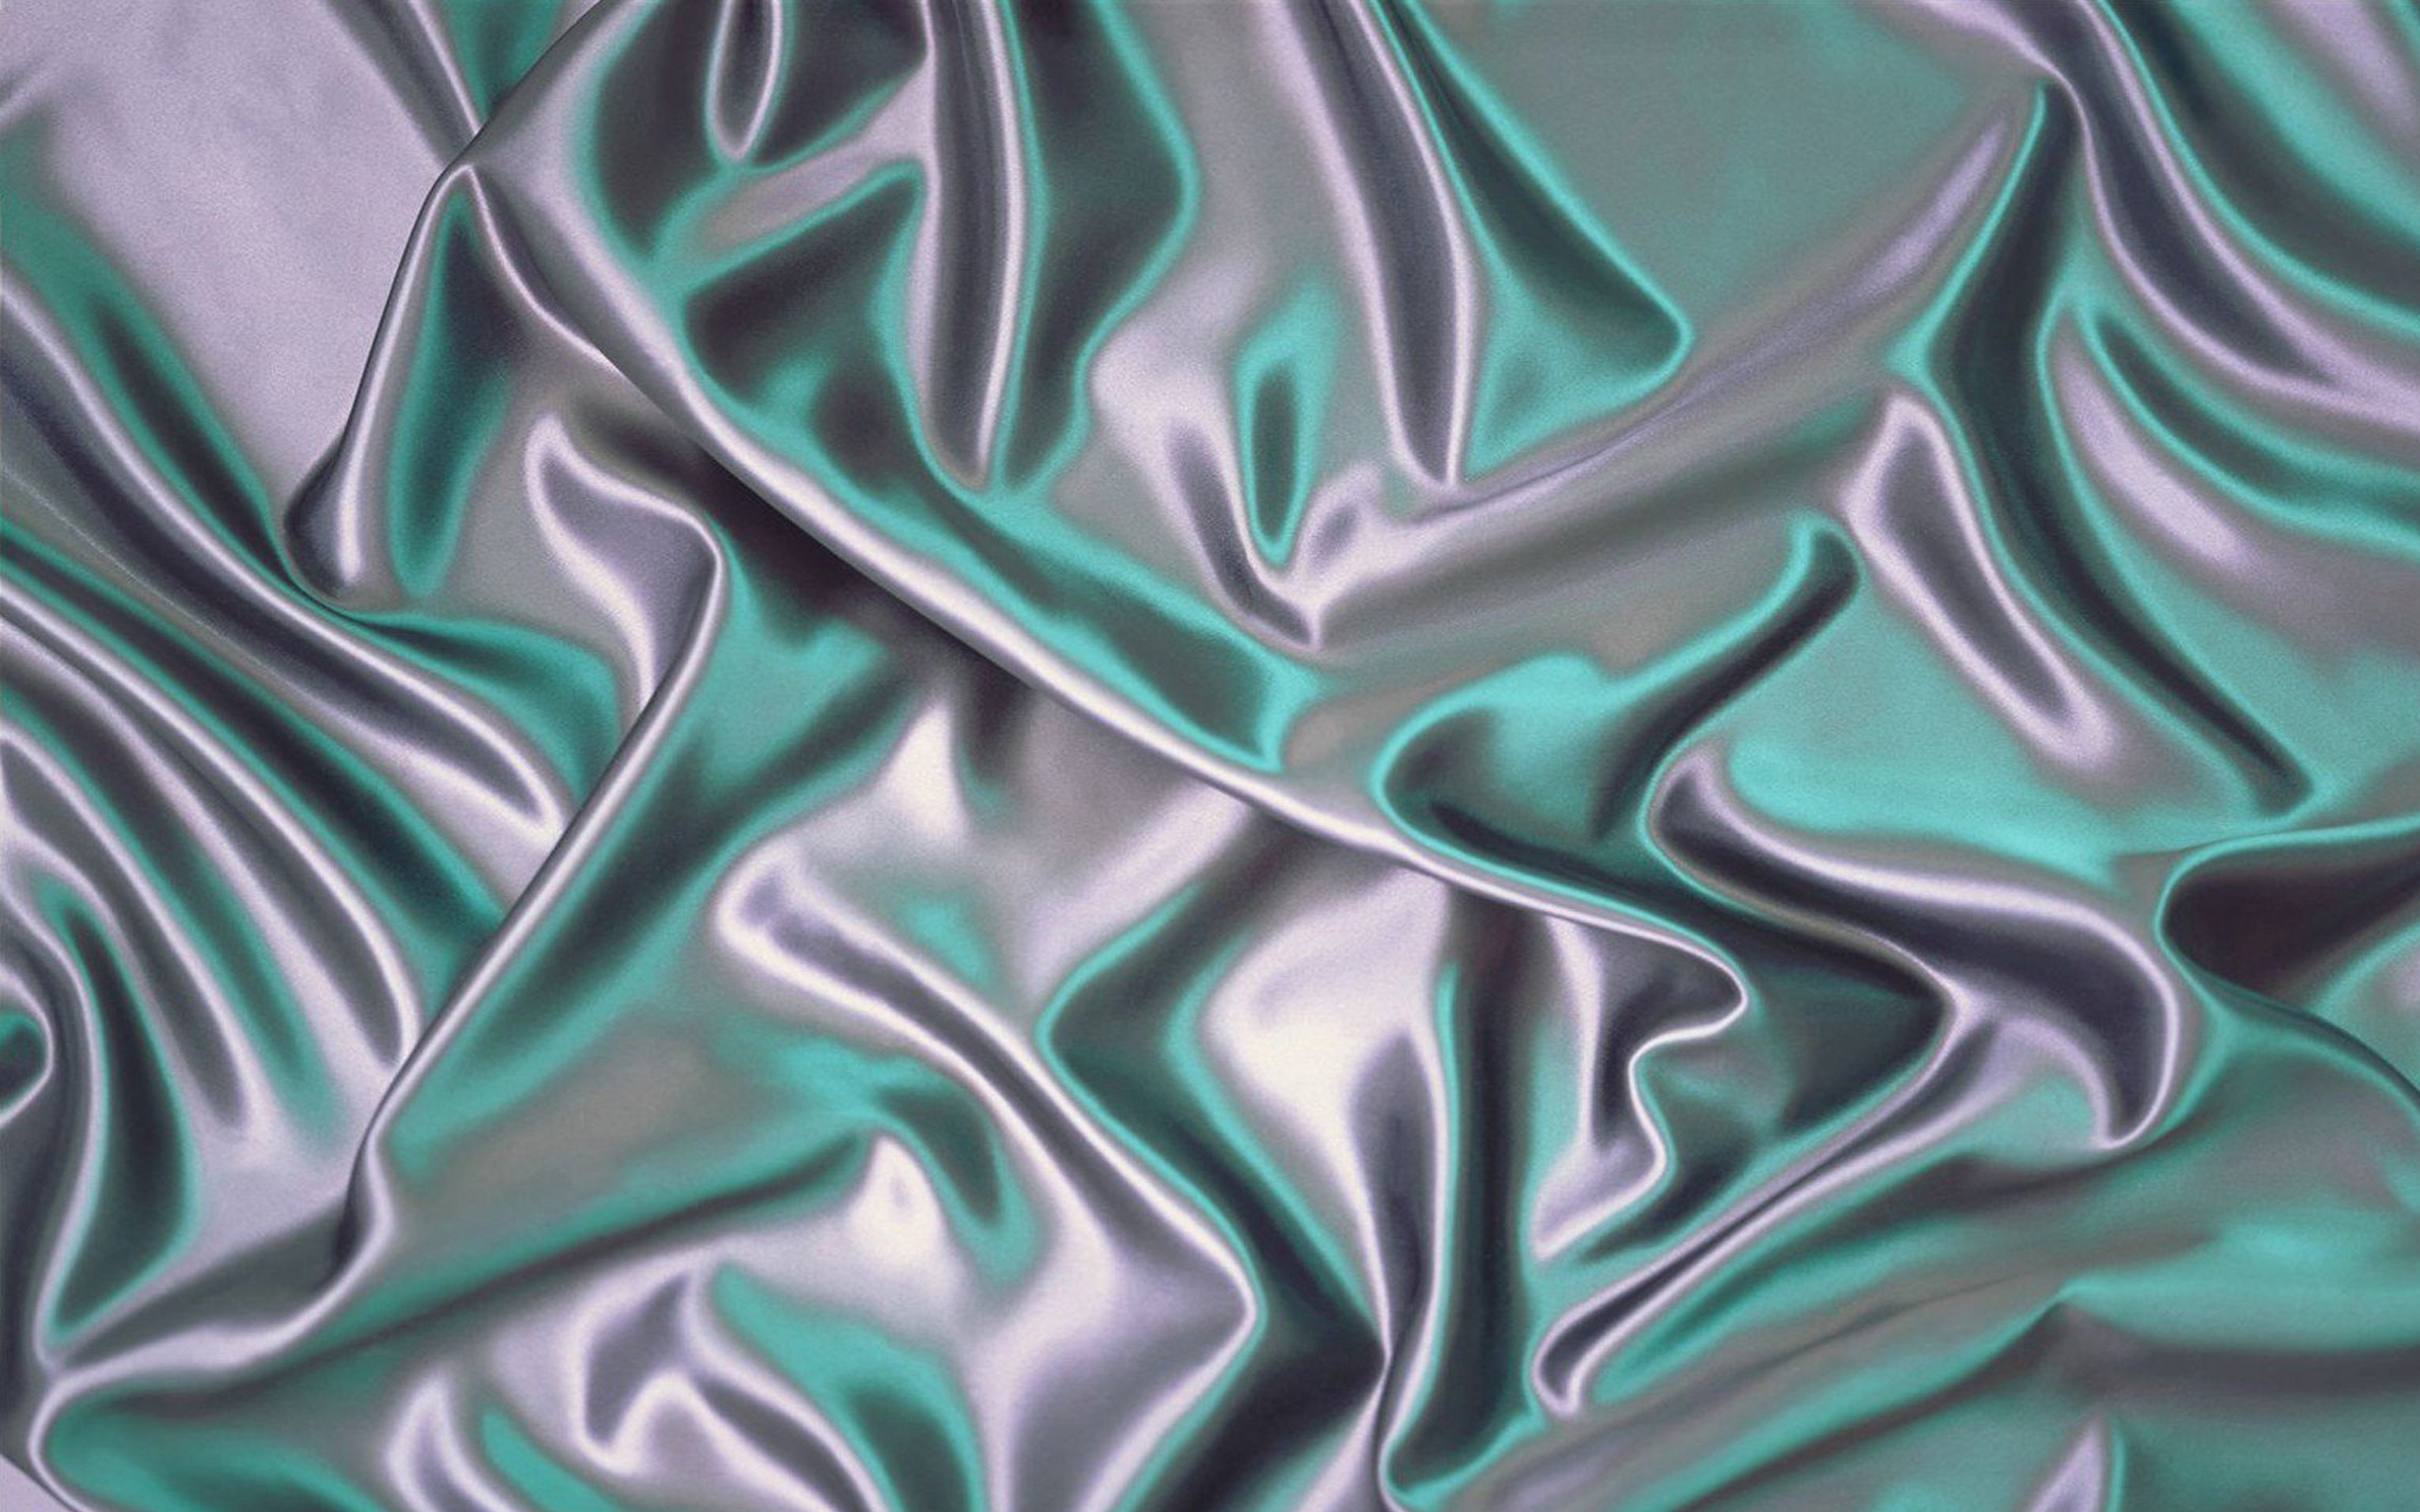 A close up of an abstract fabric - Silver